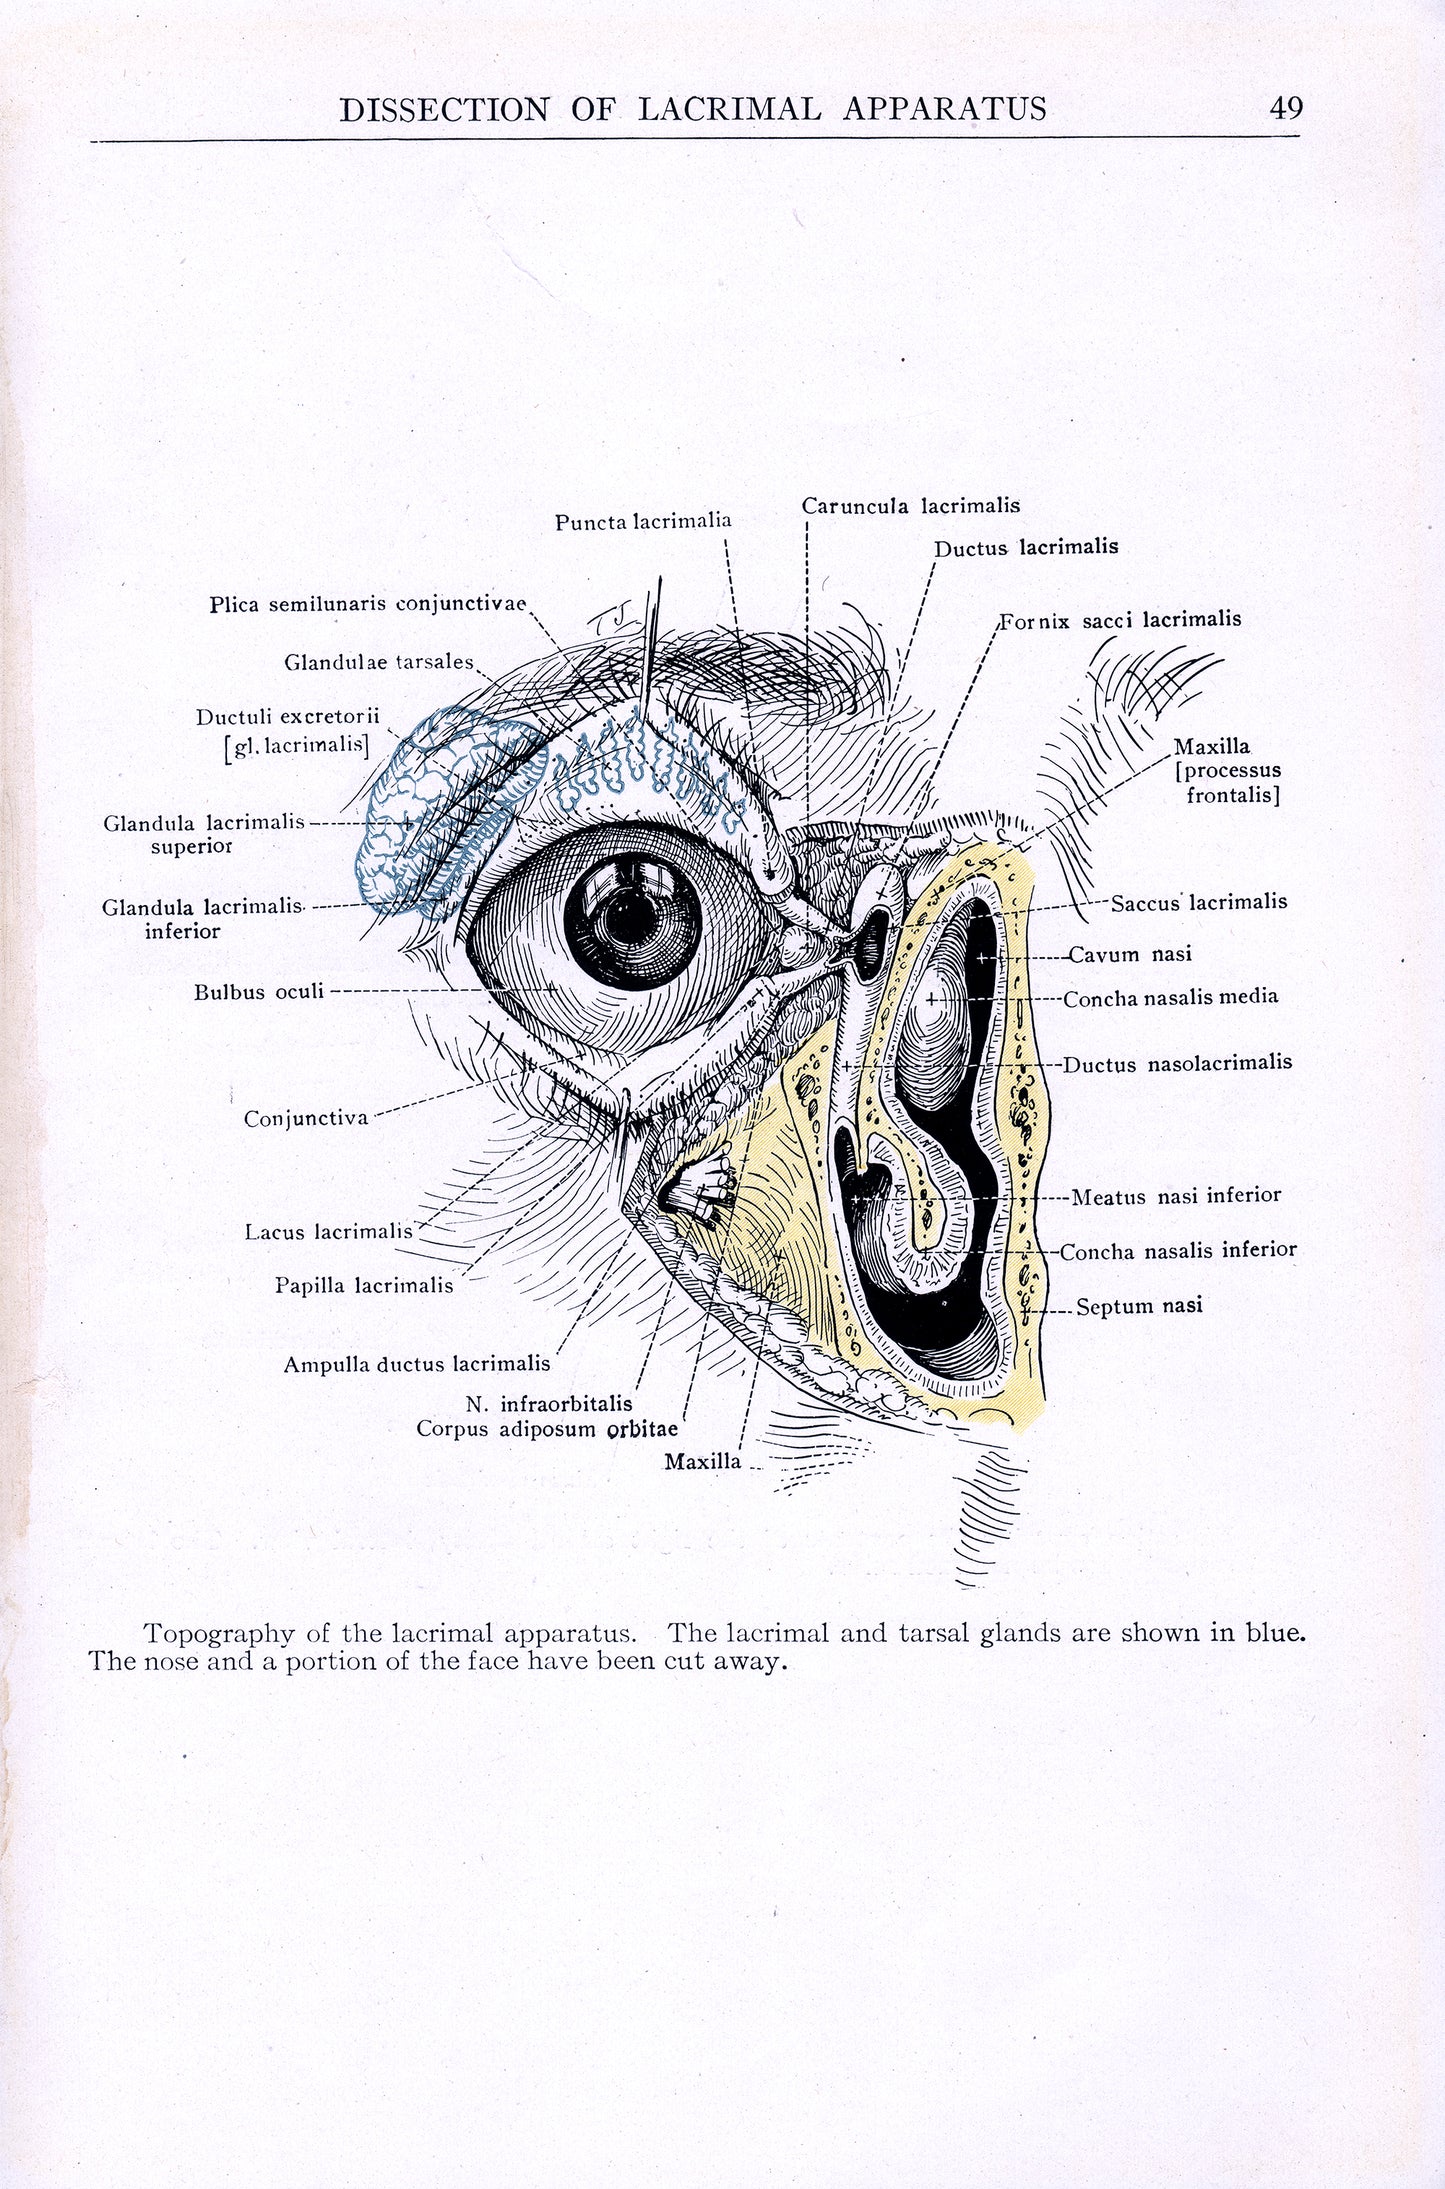 Dissection of Lacrimal Apparatus - Print - Stomping Grounds